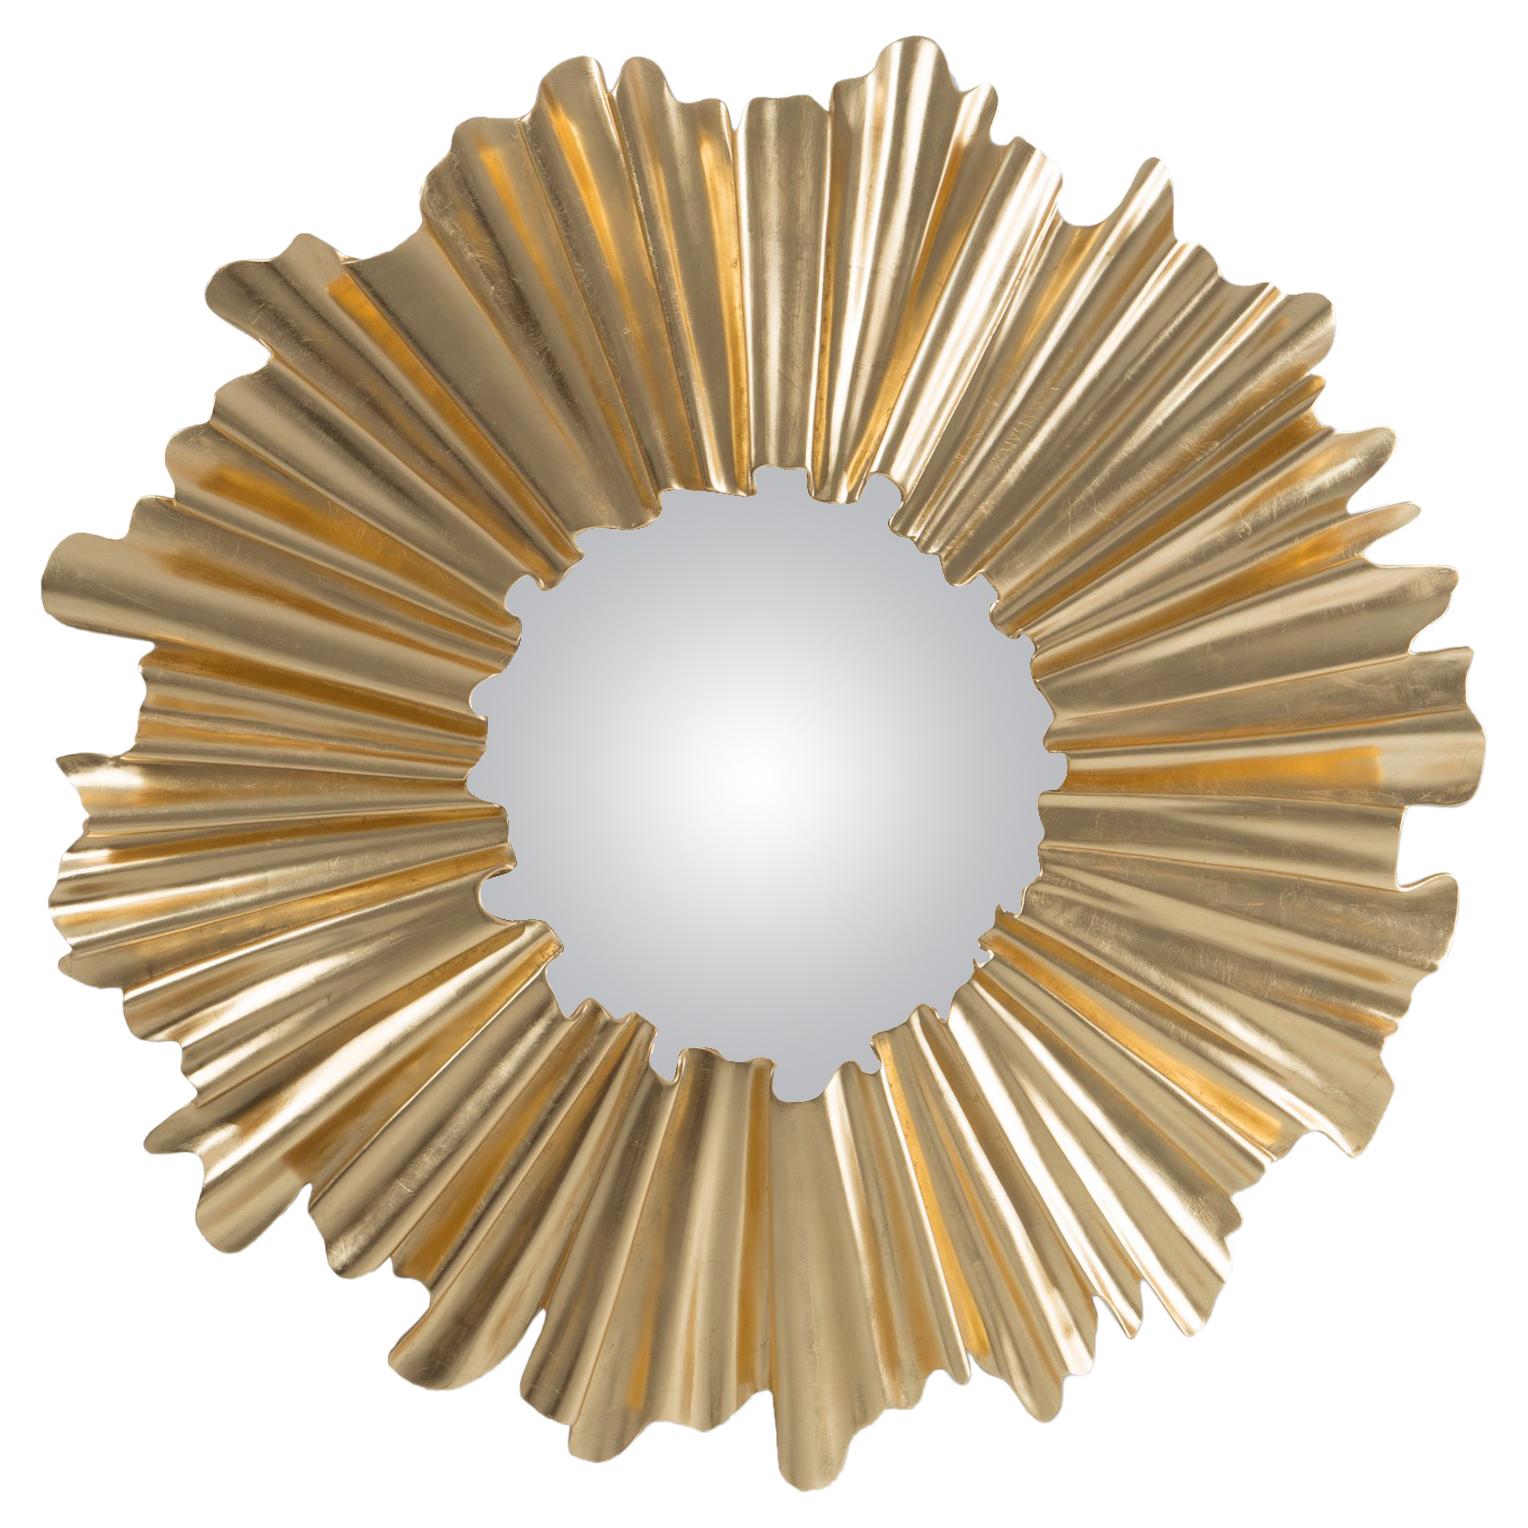 Fluted Gold Mirror in Solid Mahogany Wood